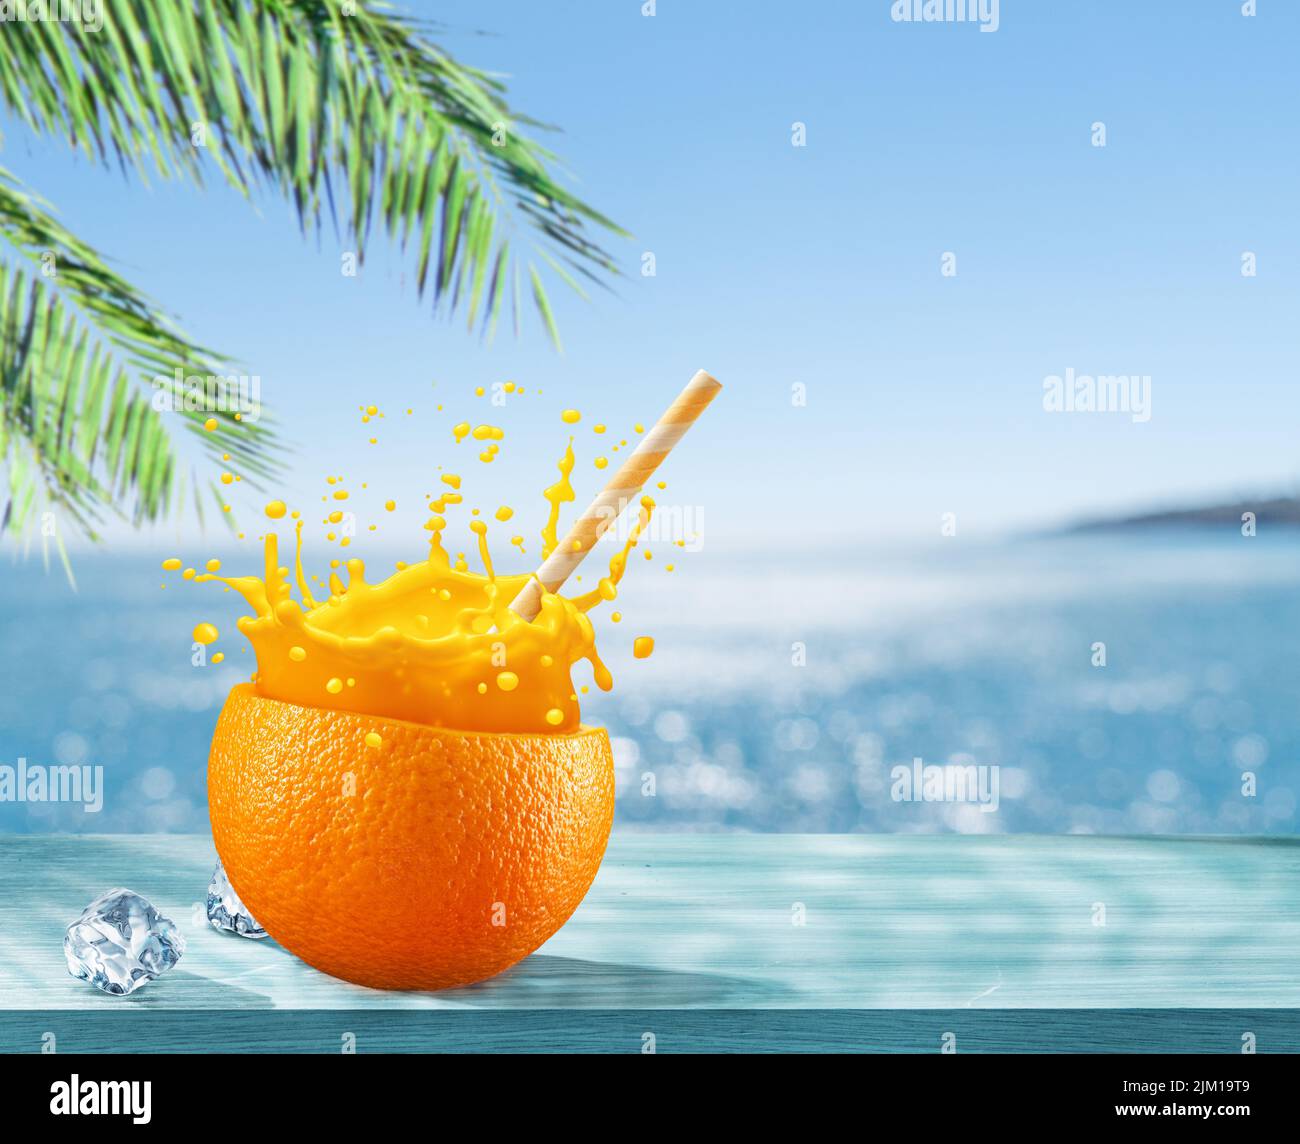 Orange fruit as the cup with orange juice splash and straw. Blue sparkling sea at the background. Drink concept. Stock Photo